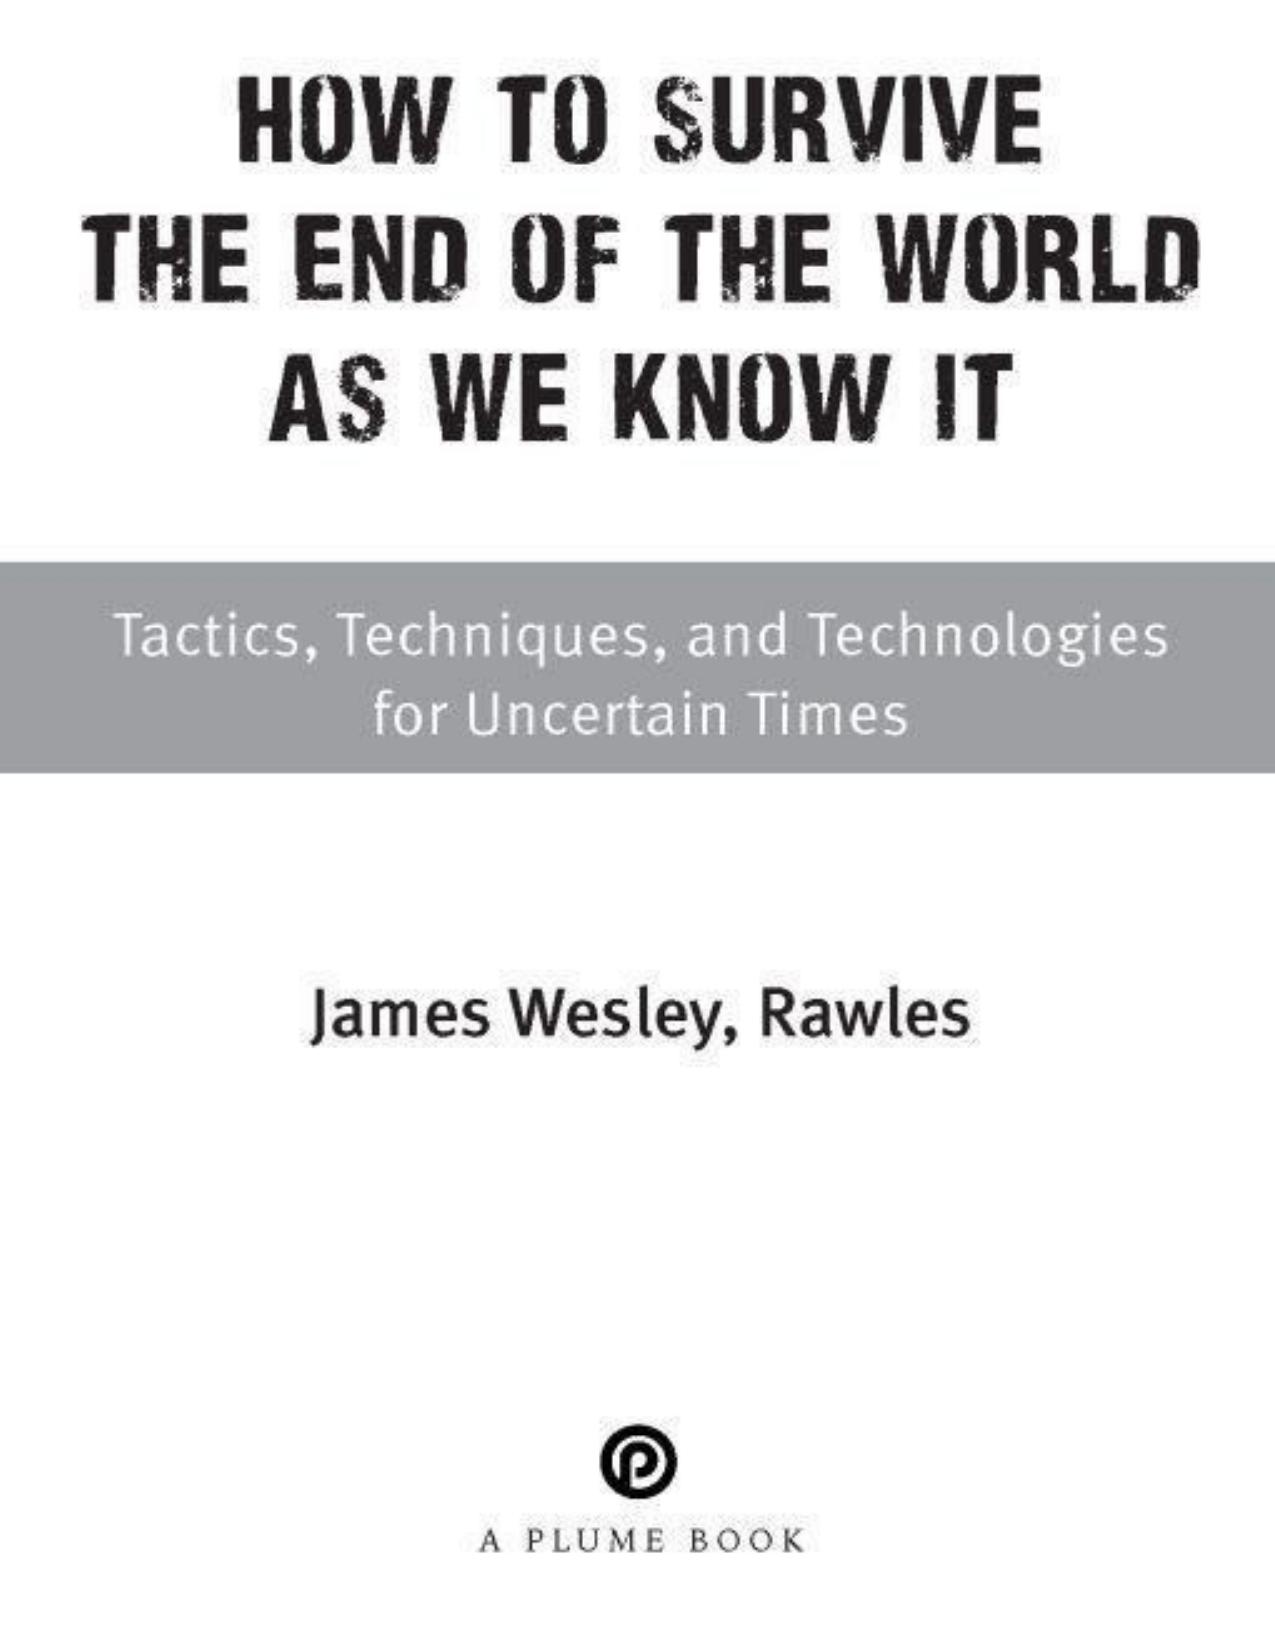 How to Survive the End of the World as We Know It by Rawles James Wesley